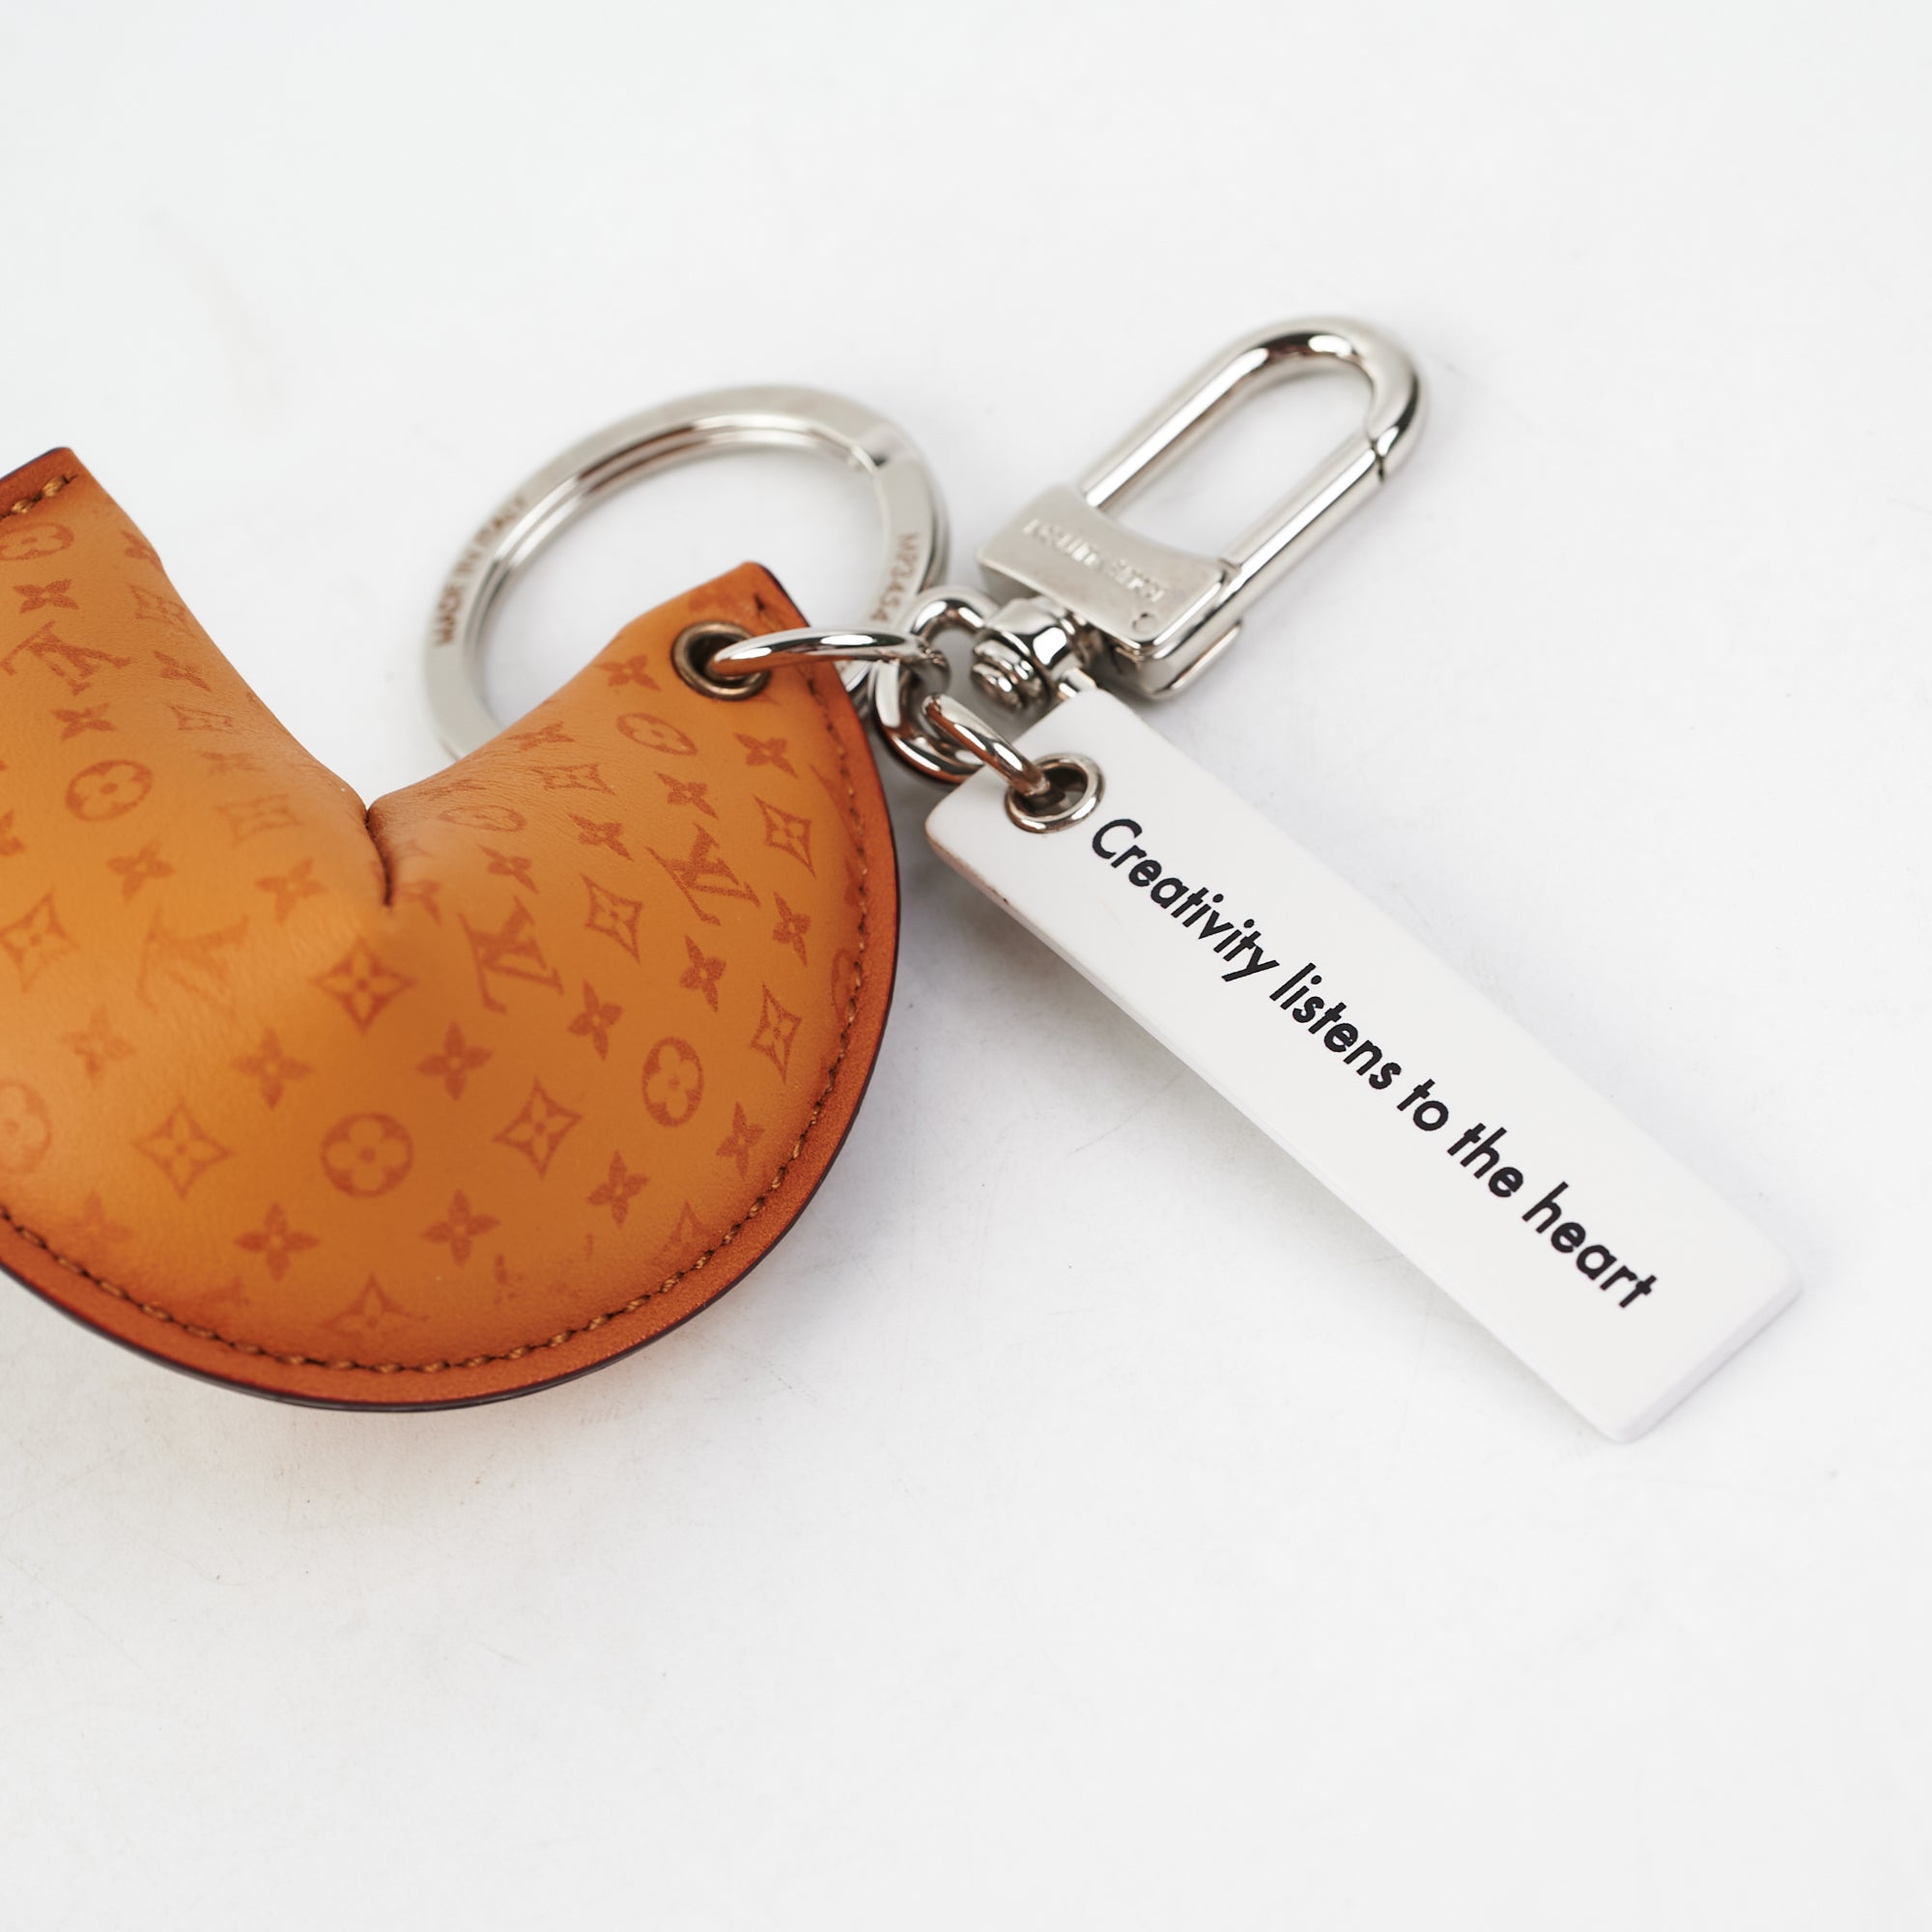 Louis Vuitton Fortune Cookie Bag - For Sale on 1stDibs  lv fortune cookie  bag, fortune cookie bag louis vuitton, louis vuitton fortune cookie bag  charm